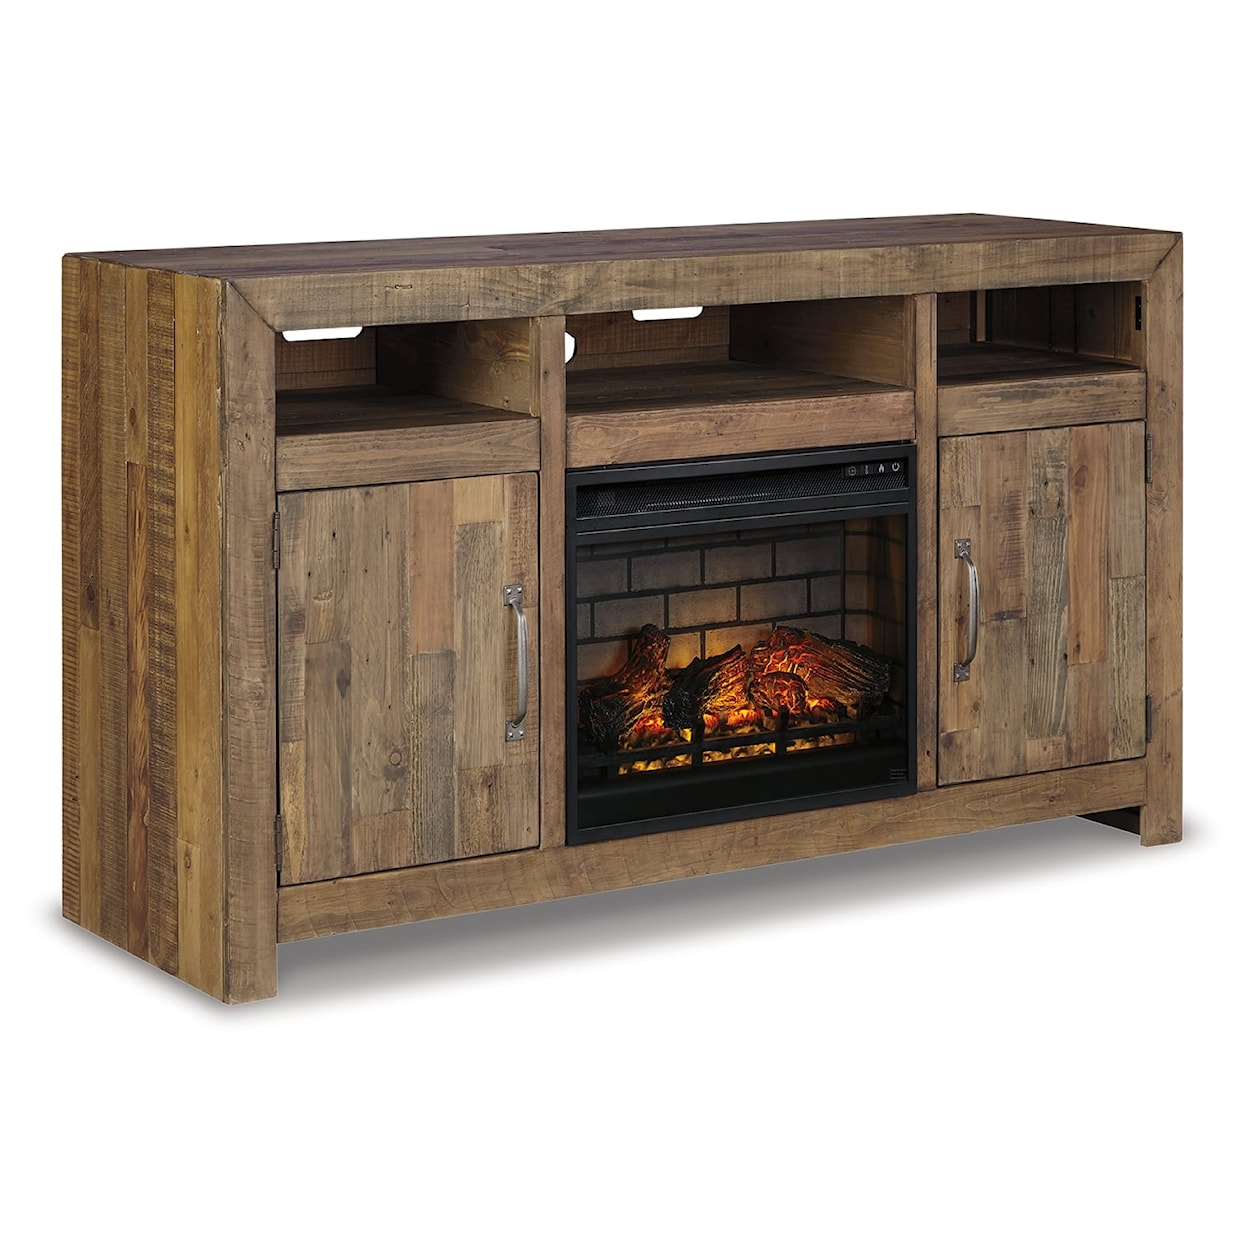 Signature Design Sommerford 62" TV Stand with Electric Fireplace